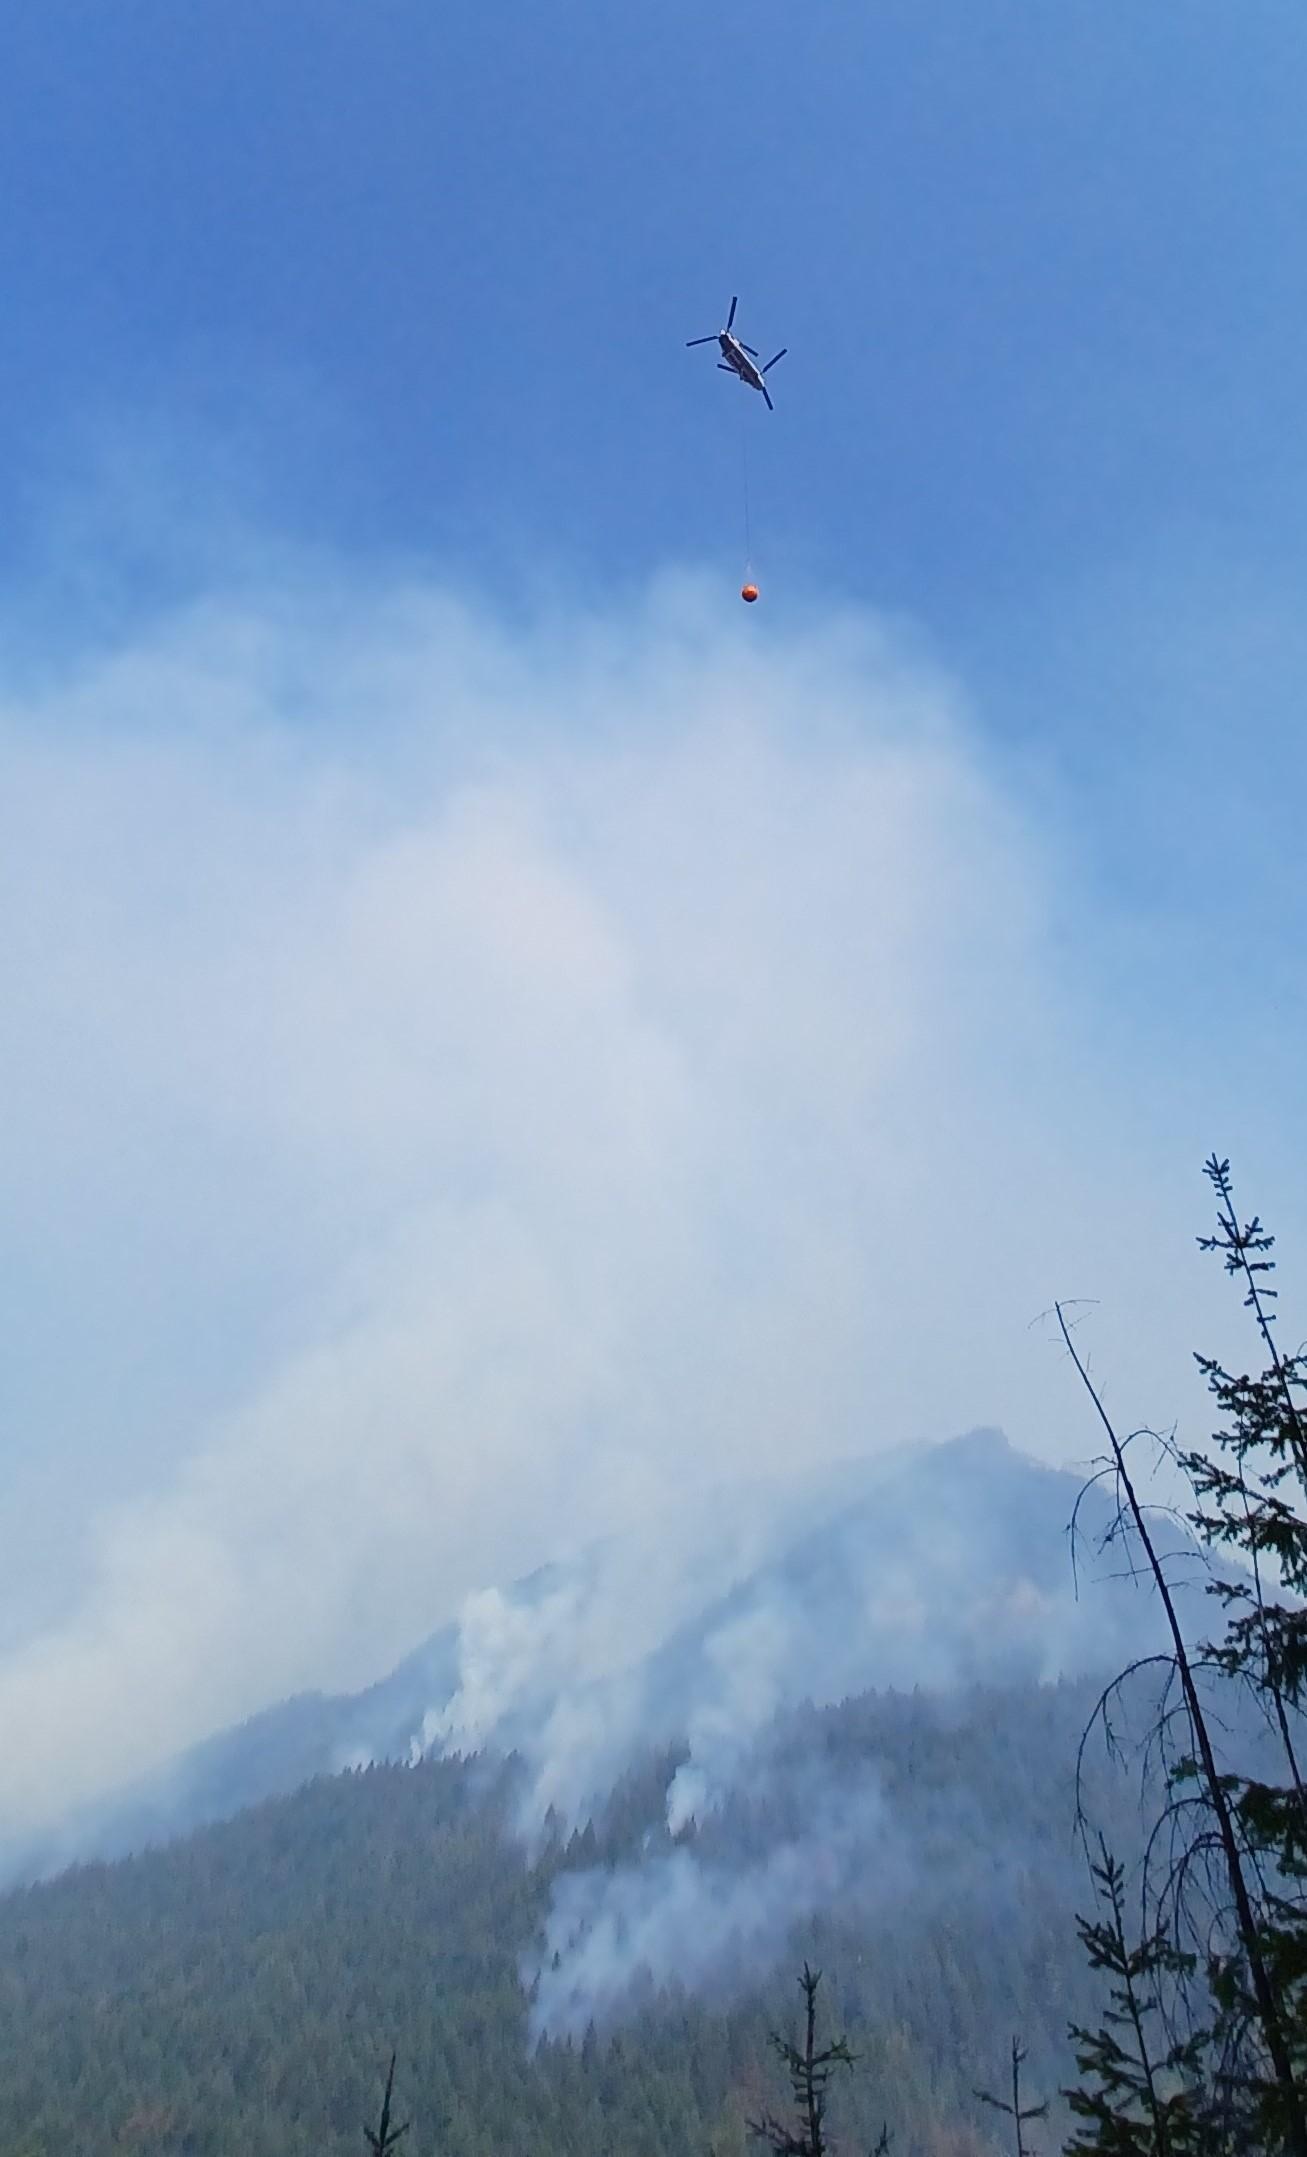  A helicopter with a large bucket of water hanging below it flies over the fire area. Smoke rises through the trees on the forested slopes.